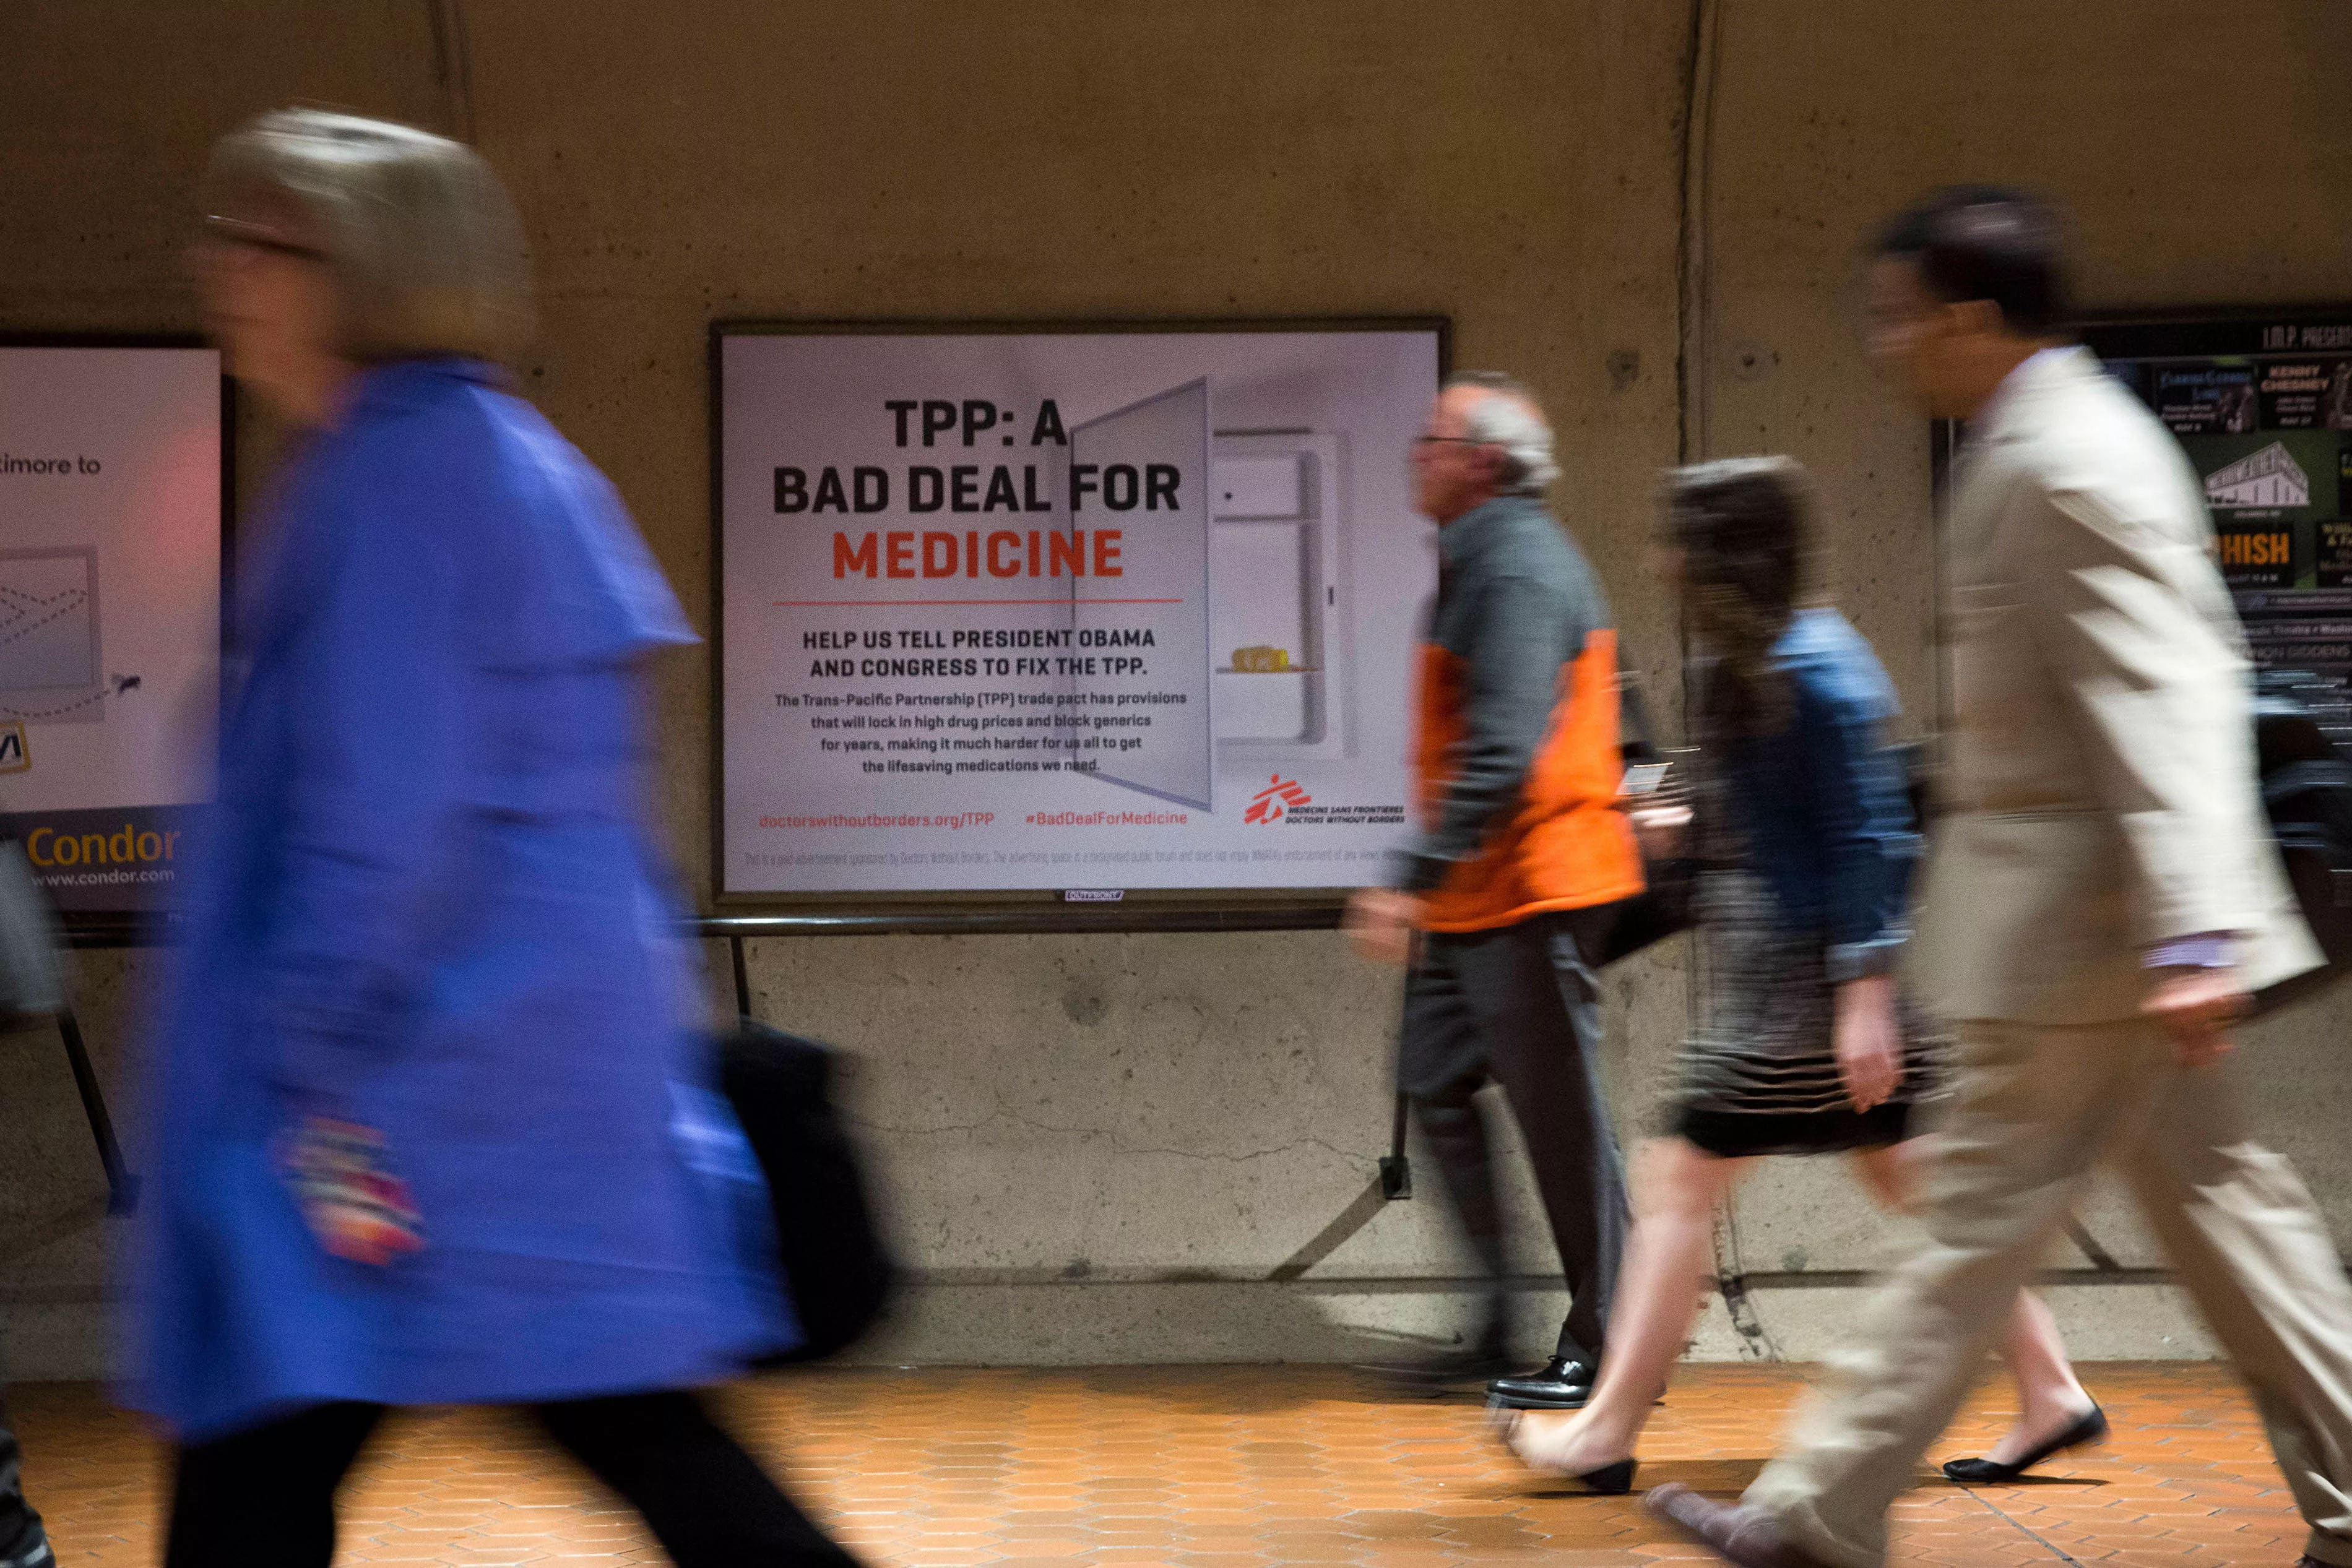 Metro advertisements for Doctors Without Borders